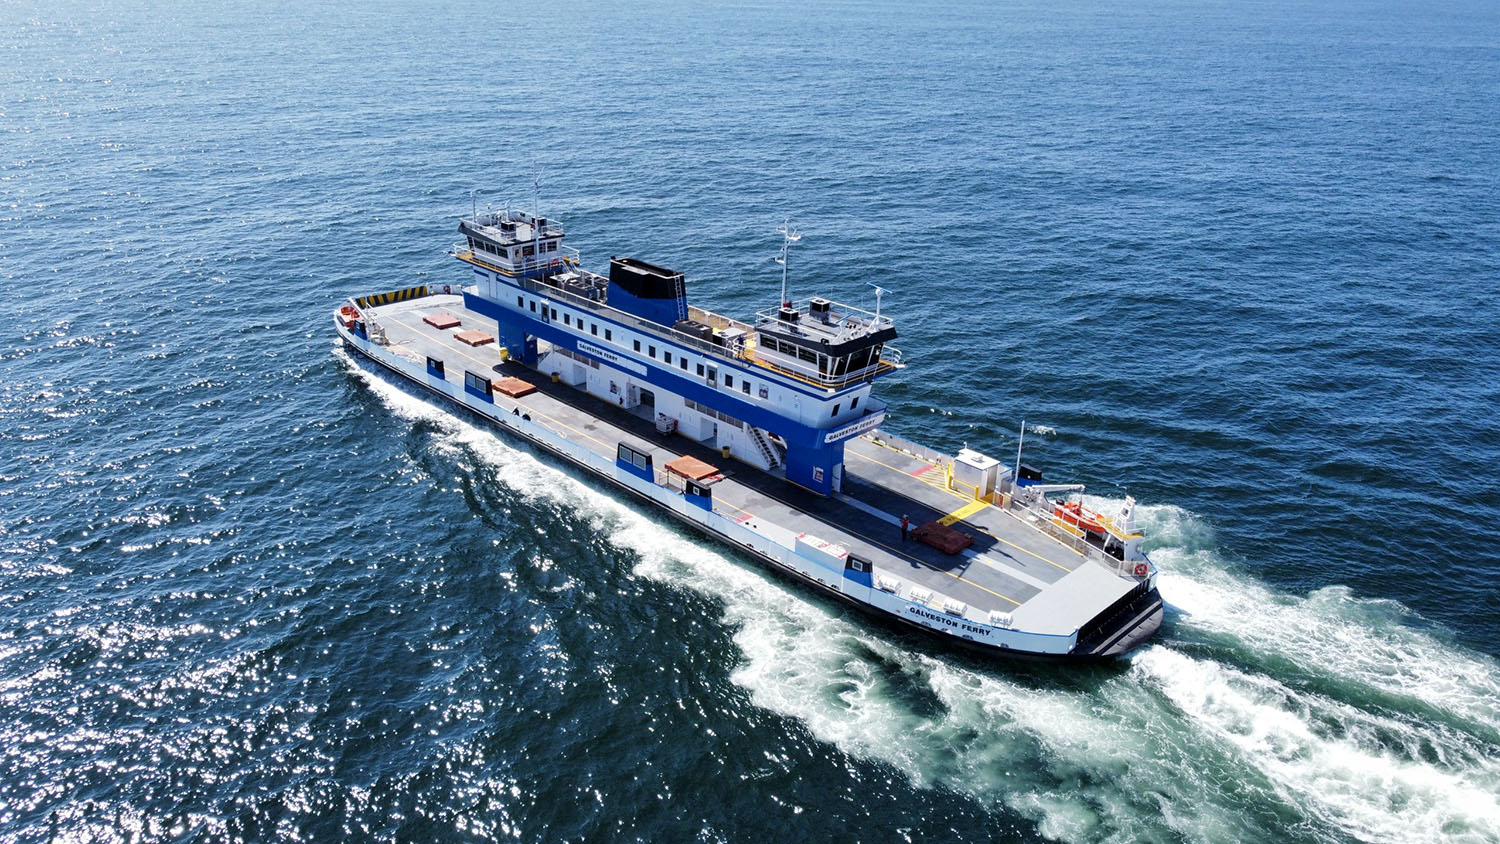 The 293- by 66-foot hybrid-powered ferry Esperanza “Hope” Andrade was designed by The Shearer Group and built by Gulf Island Fabrication. (Photo courtesy of The Shearer Group)